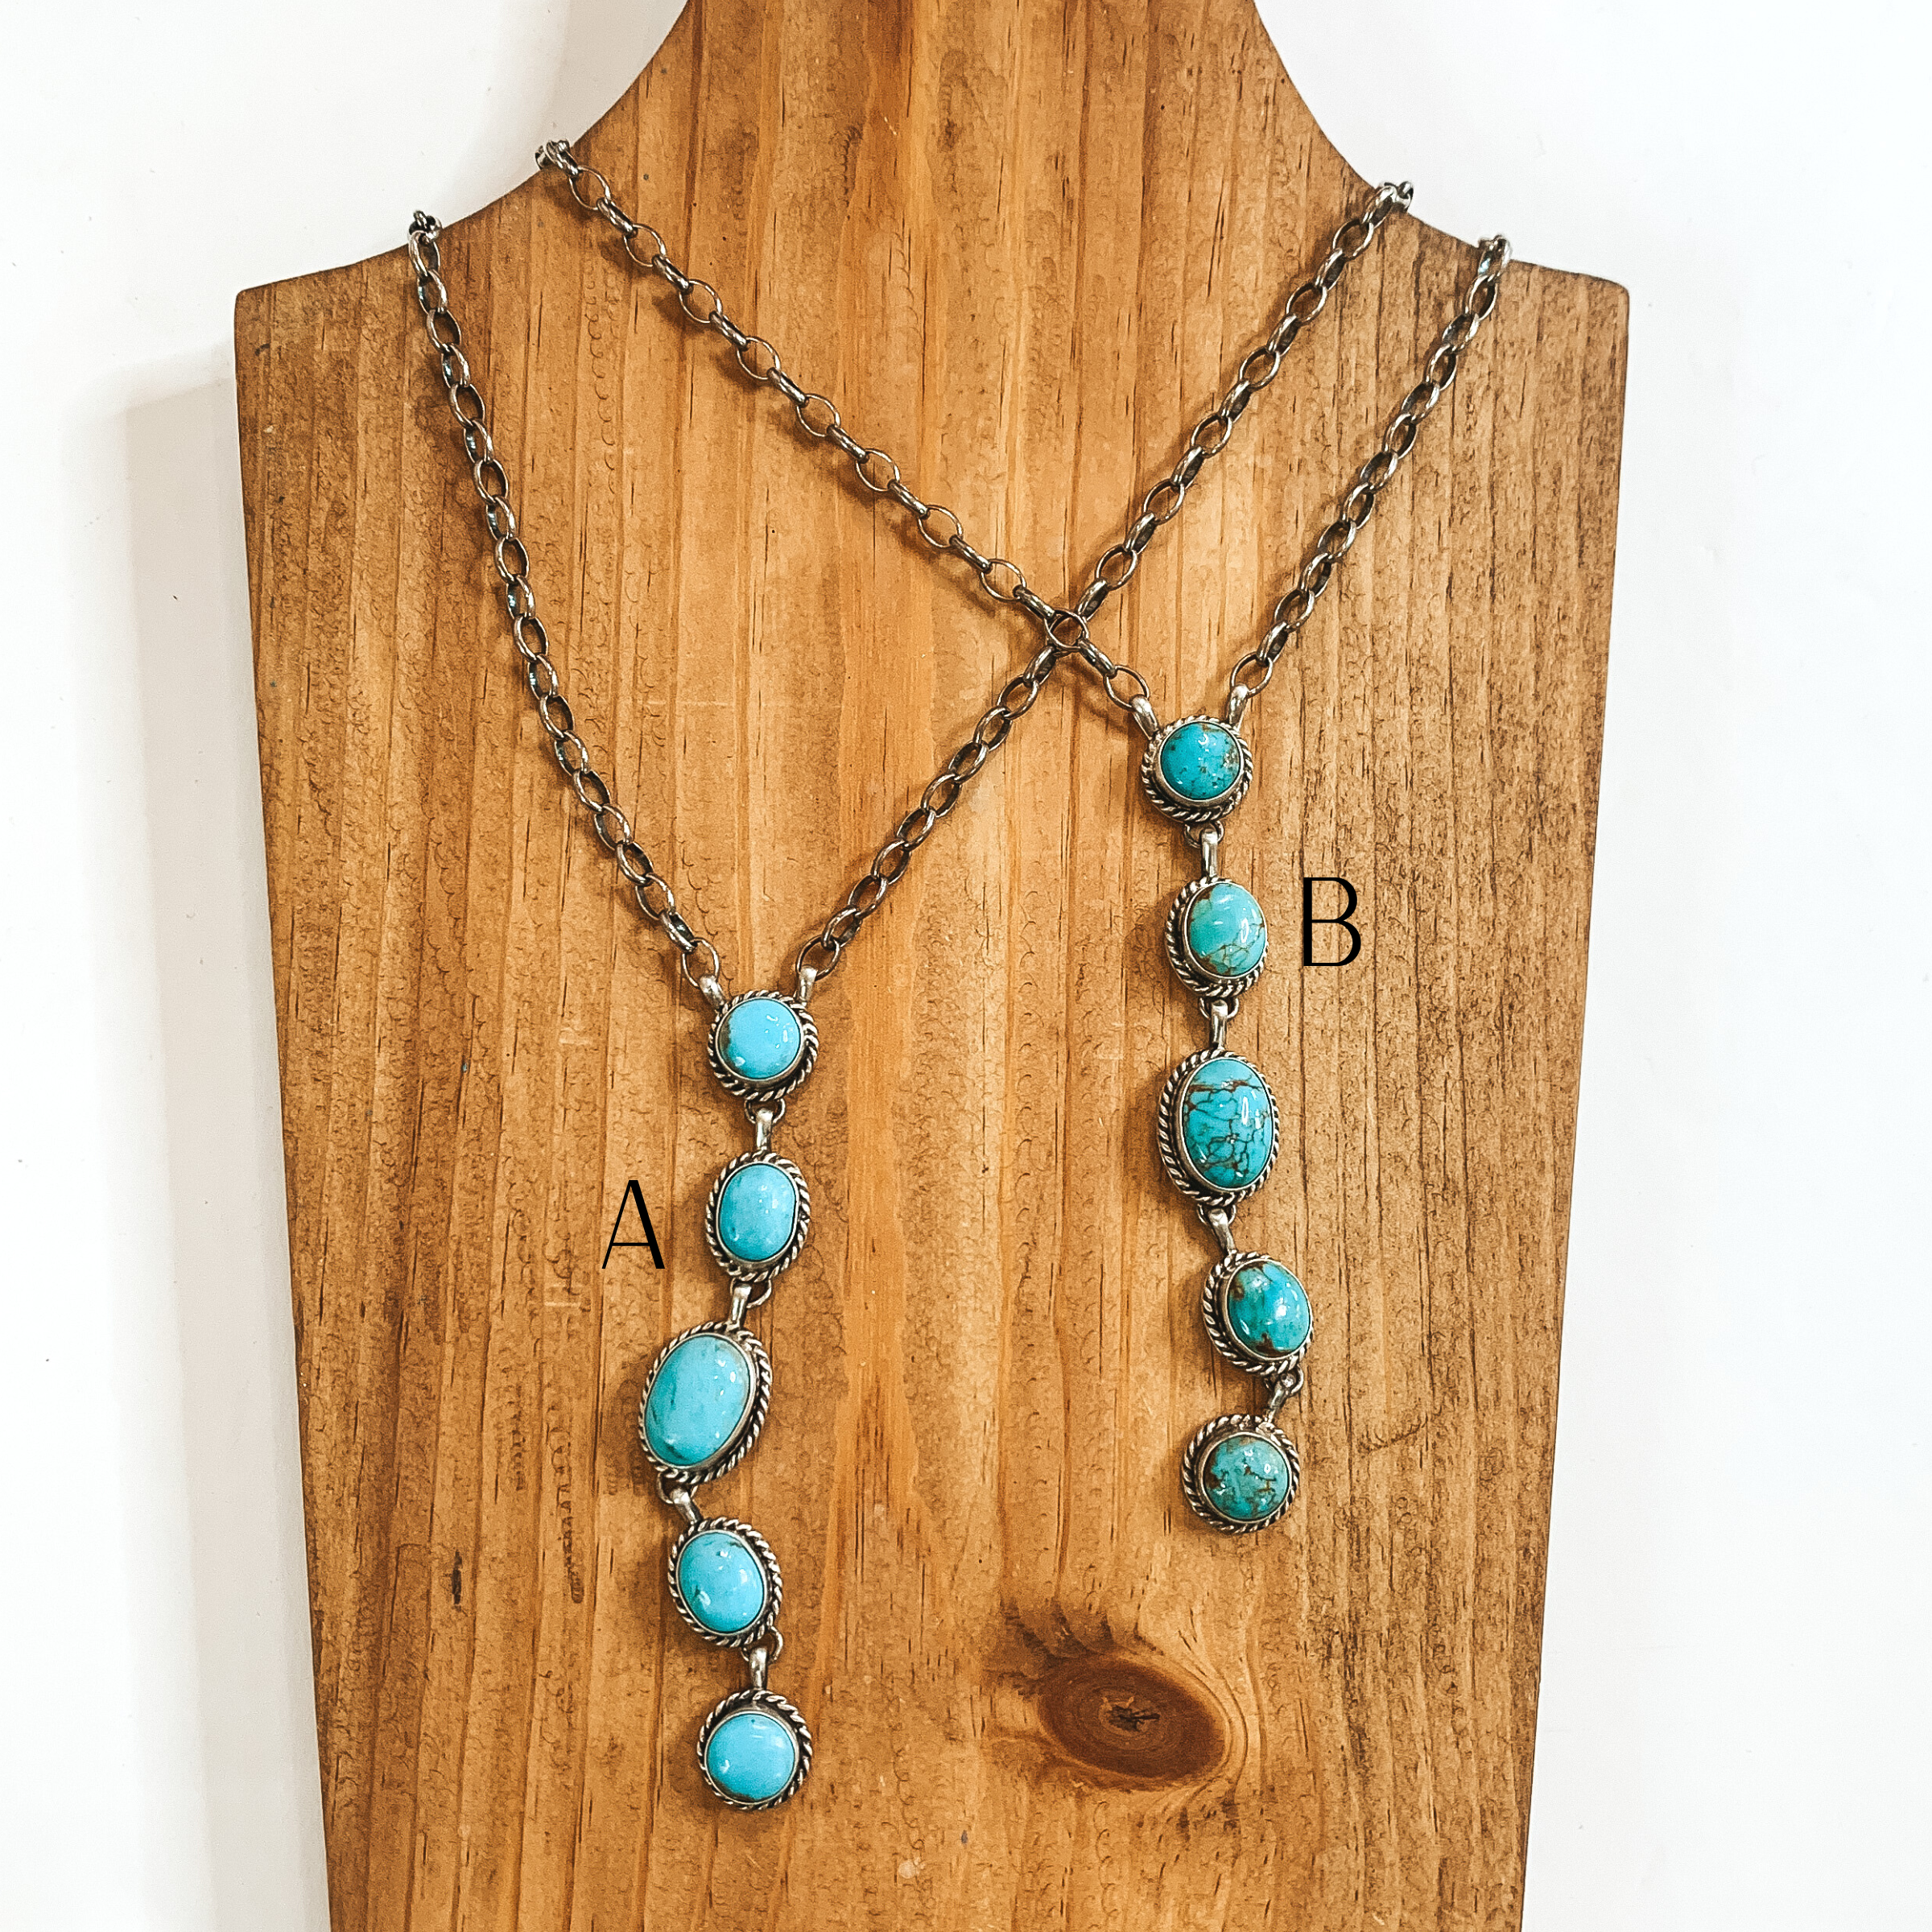 Augustine Largo | Navajo Handmade Sterling Silver Lariat Necklace with Five Kingman Turquoise Pendants - Giddy Up Glamour Boutique